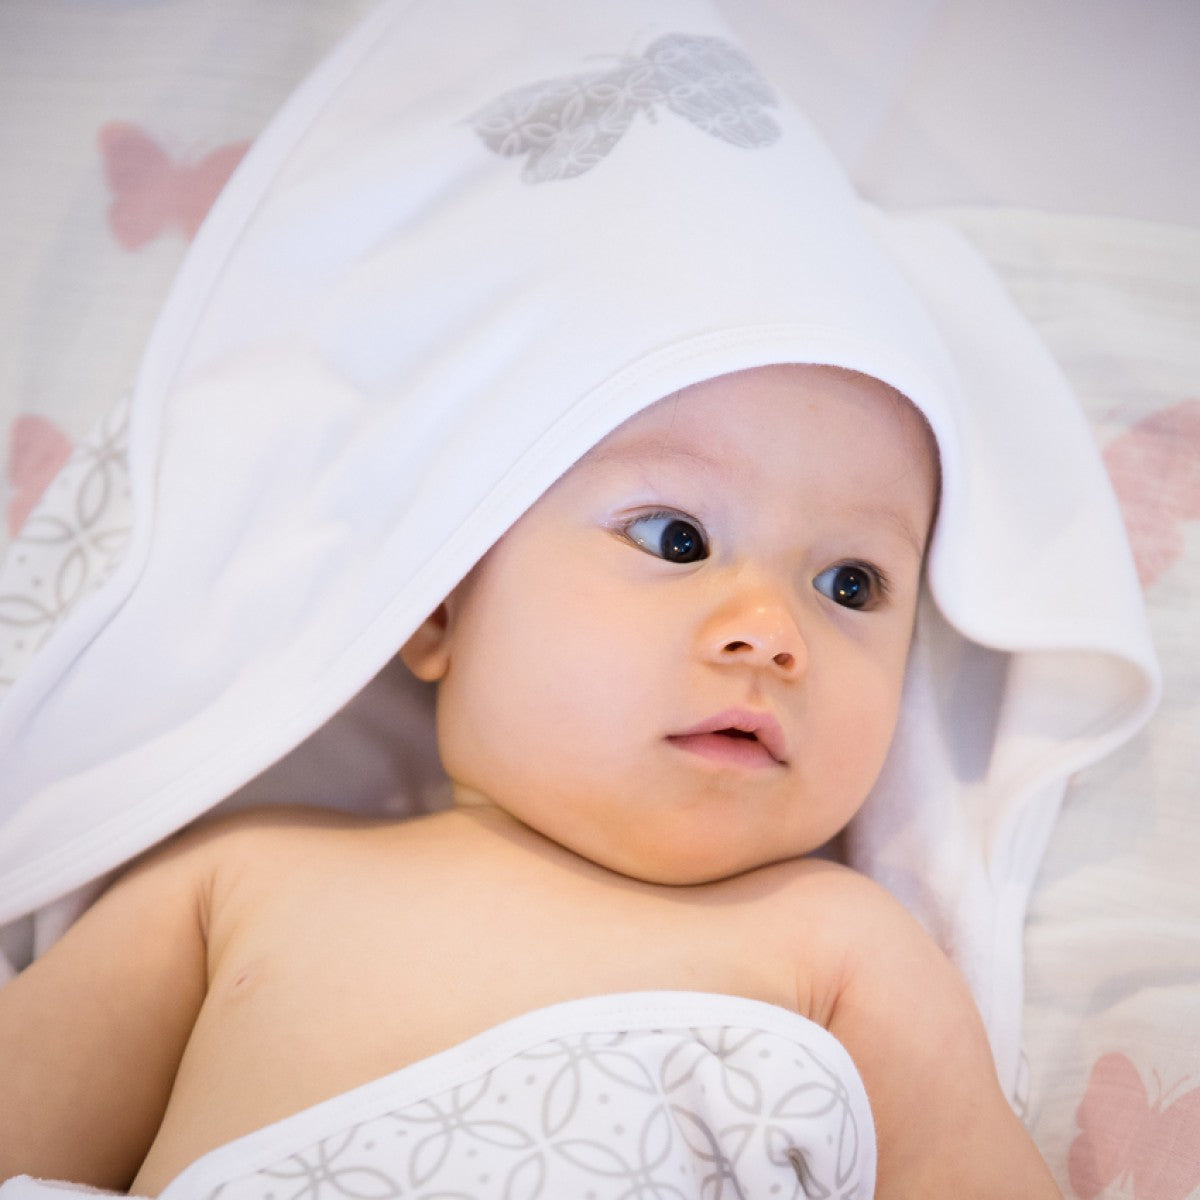 Lily Hooded Towel Grey